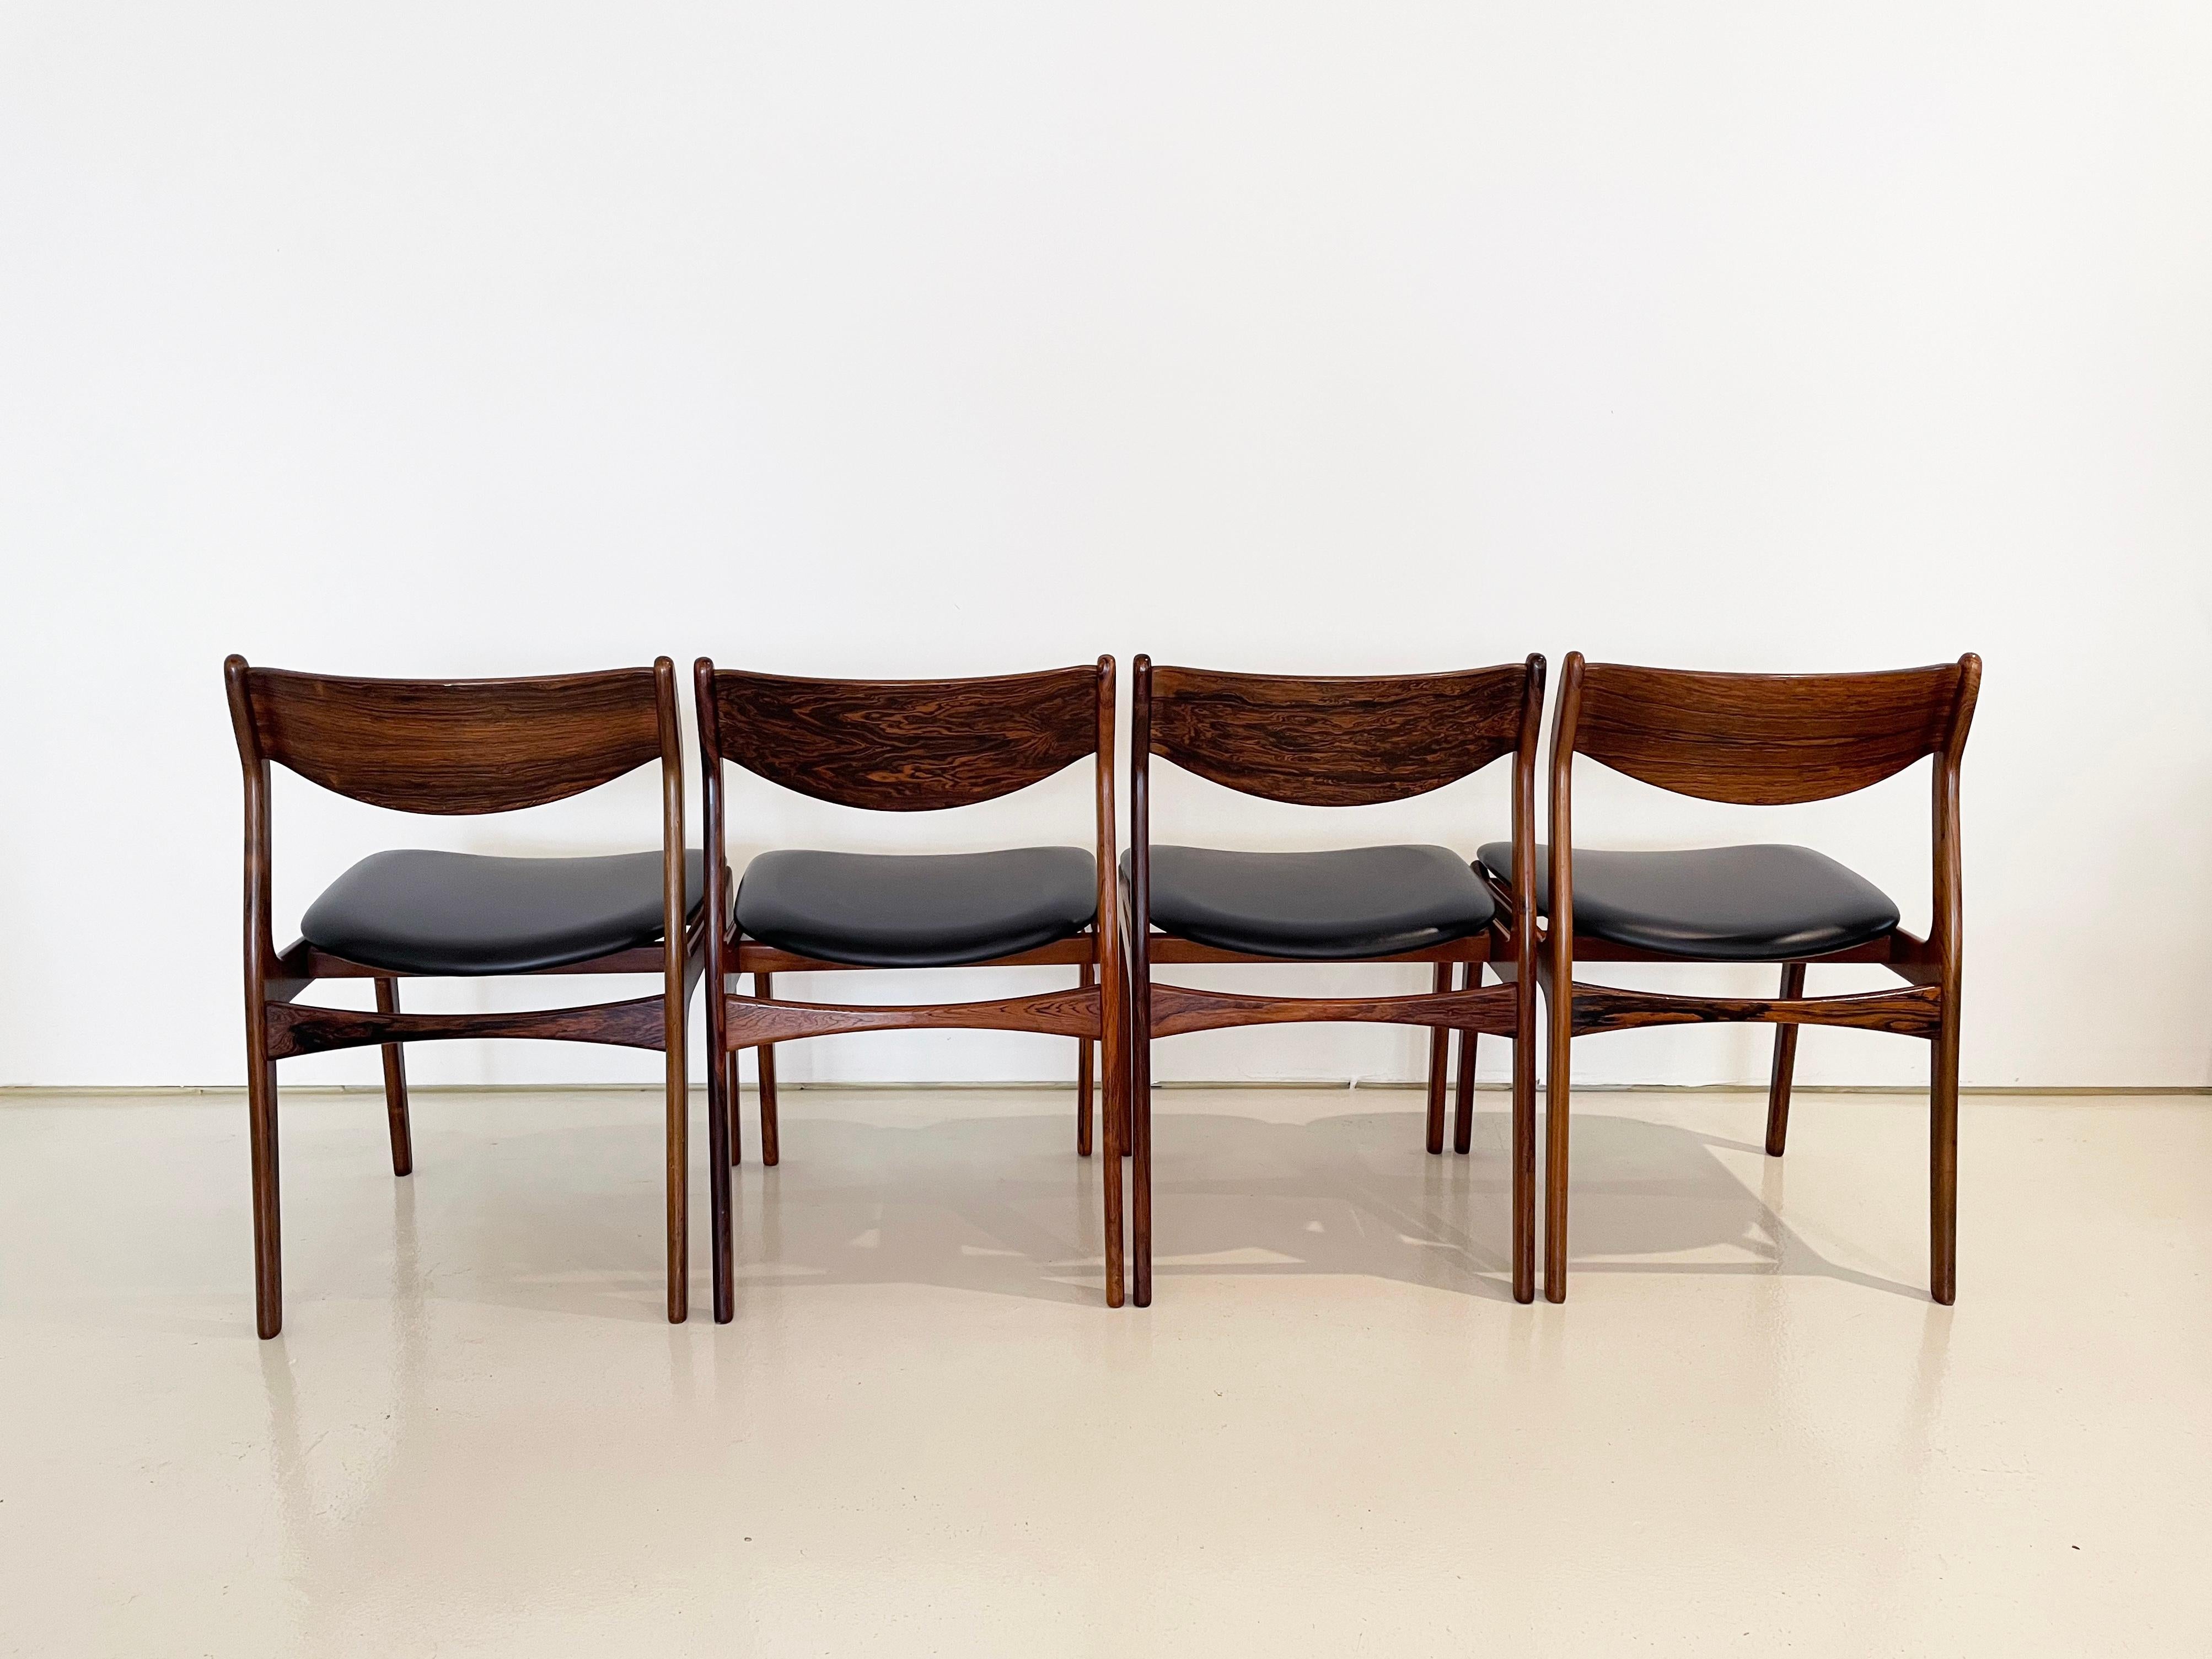 Vintage Mid-century Danish Dining Chairs, Designed by P.E. Jorgensen, Set of 8 For Sale 6